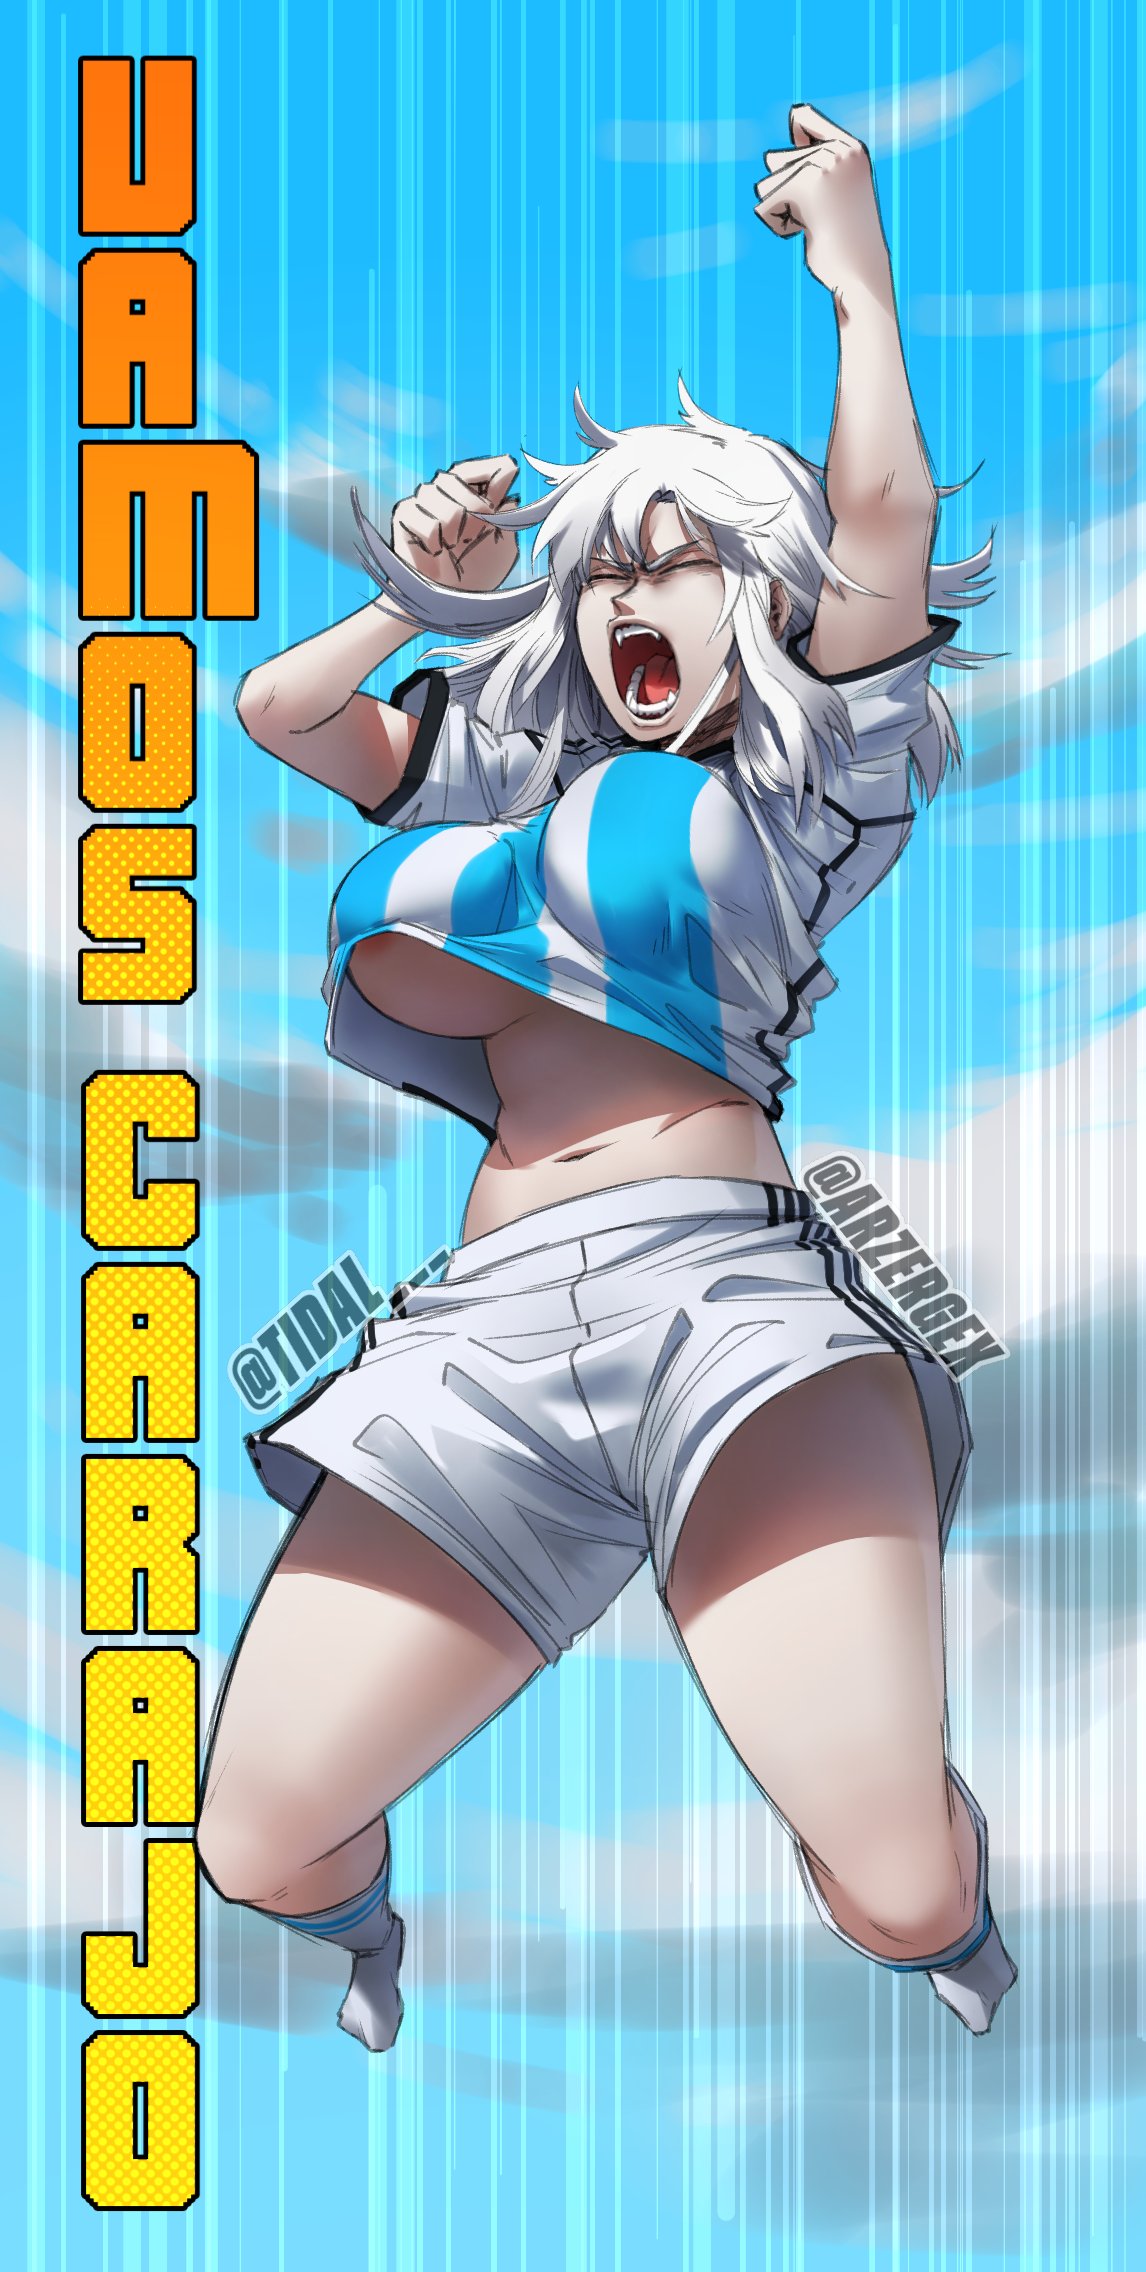 1girls albina_(tidal) argentina arzergex celebration closed_eyes closed_eyes clothed clothing fist_up football_uniform jumping nipple no_bra open_mouth sky_background spanish_text tidal_(artist) viewed_from_below